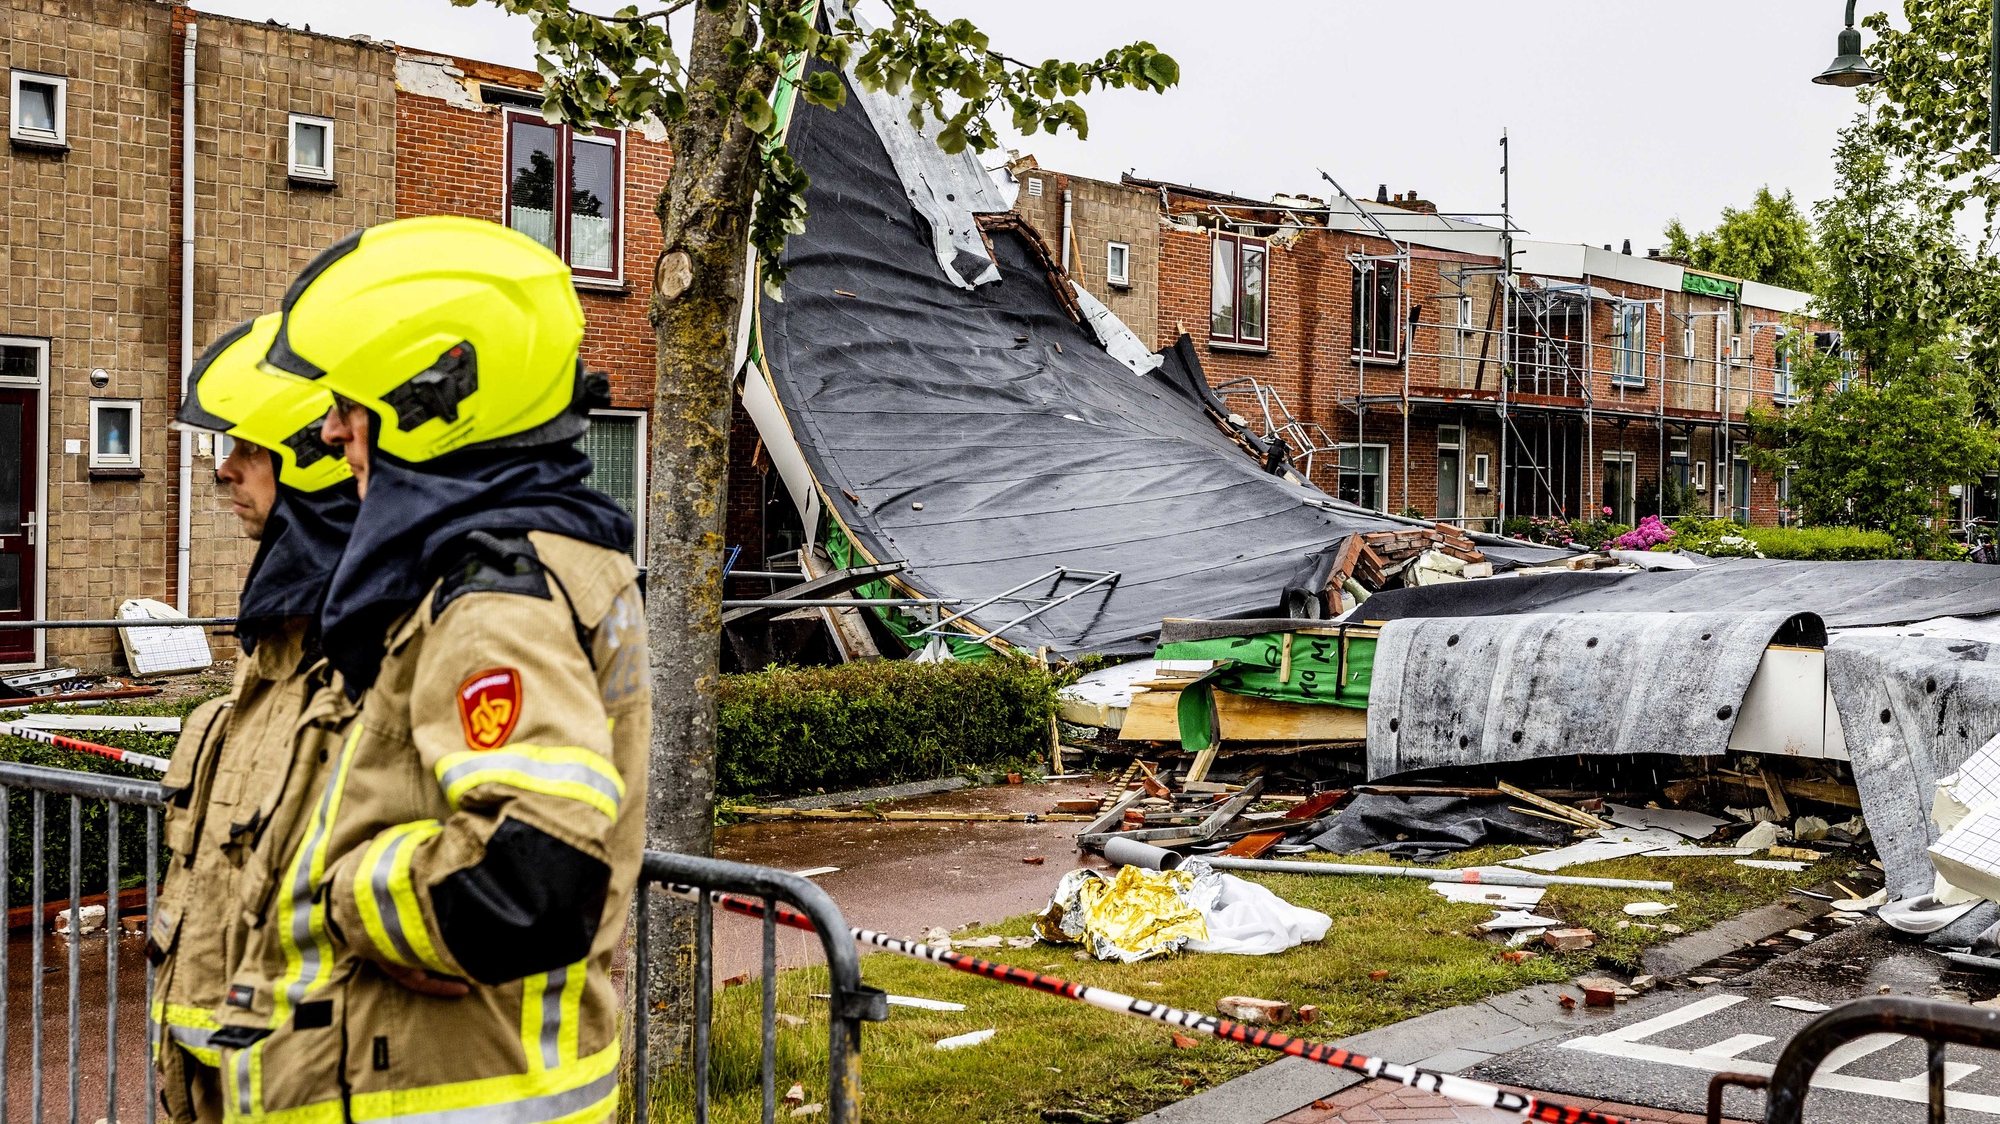 epa10036815 Emergency services personnel stand near a building damaged by a tornado in Zierikzee, Netherlands, 27 June 2022. According to Zeeland province authorities, one person was killed and ten others injured after a tornado hit Zierikzee on 27 June. The tornado also caused material damage to roof tiles of several buildings and trees in the area affected.  EPA/JEFFREY GROENEWEG